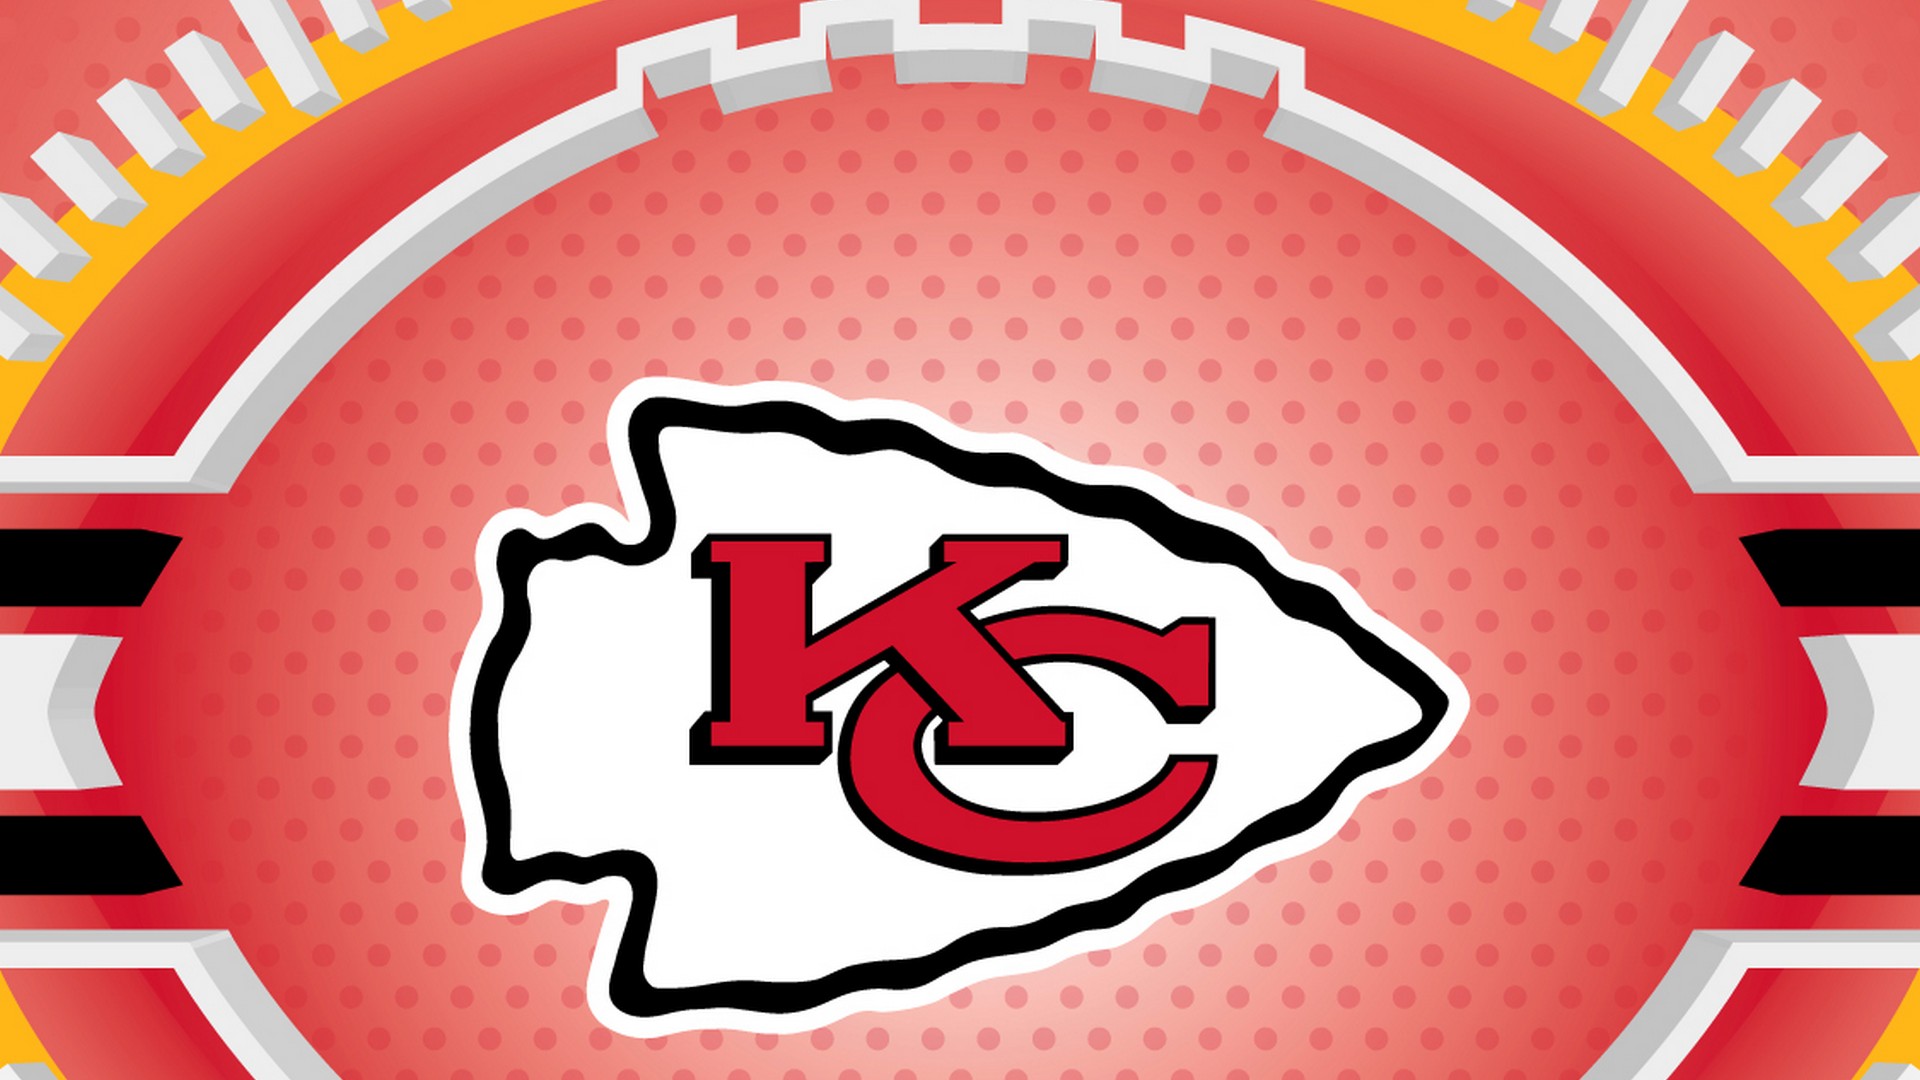 Kansas City Chiefs For PC Wallpaper With Resolution 1920X1080 pixel. You can make this wallpaper for your Mac or Windows Desktop Background, iPhone, Android or Tablet and another Smartphone device for free